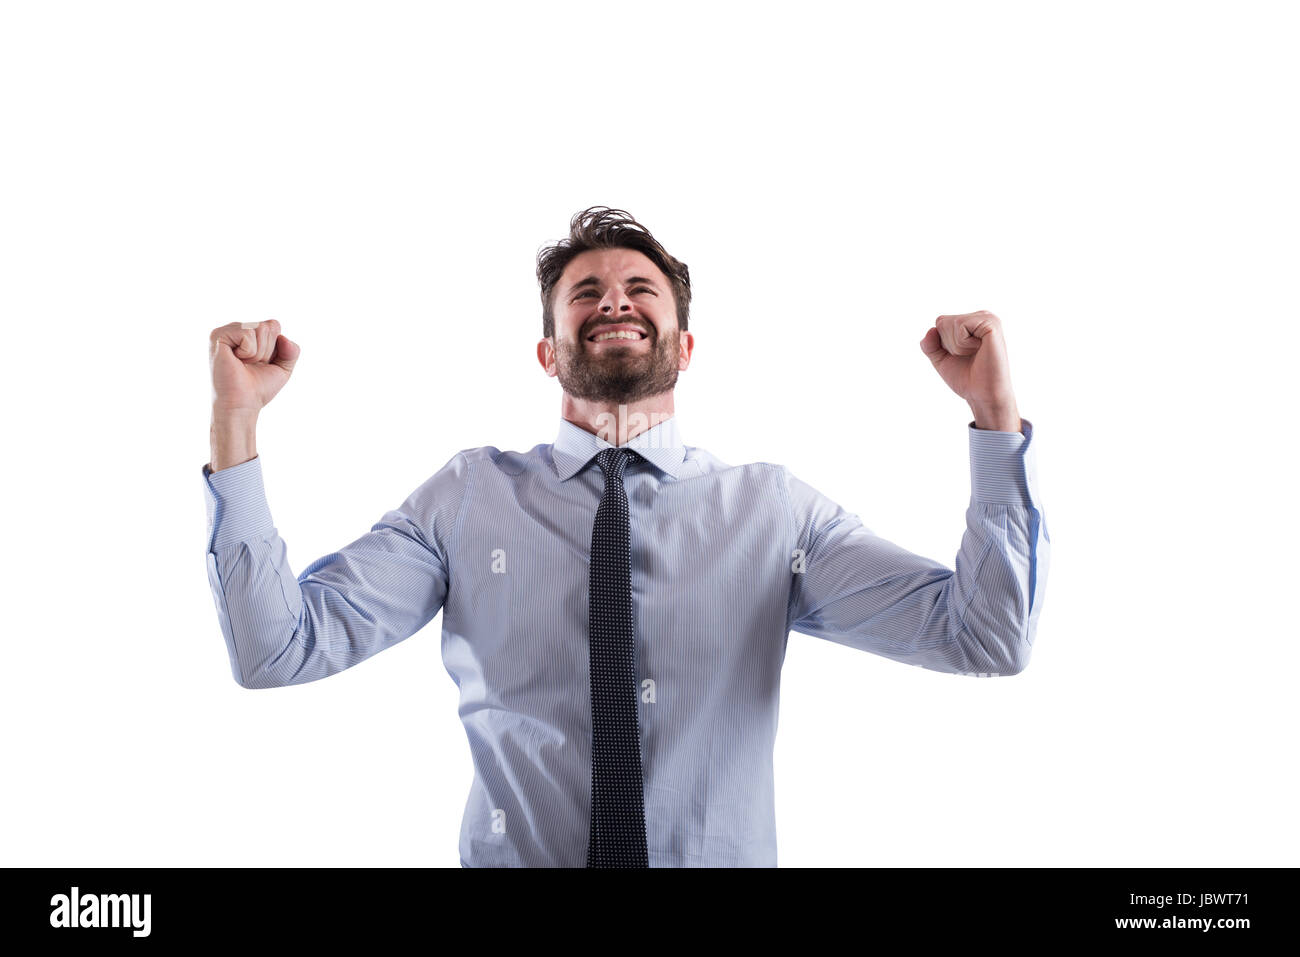 Successful victorious businessman Stock Photo